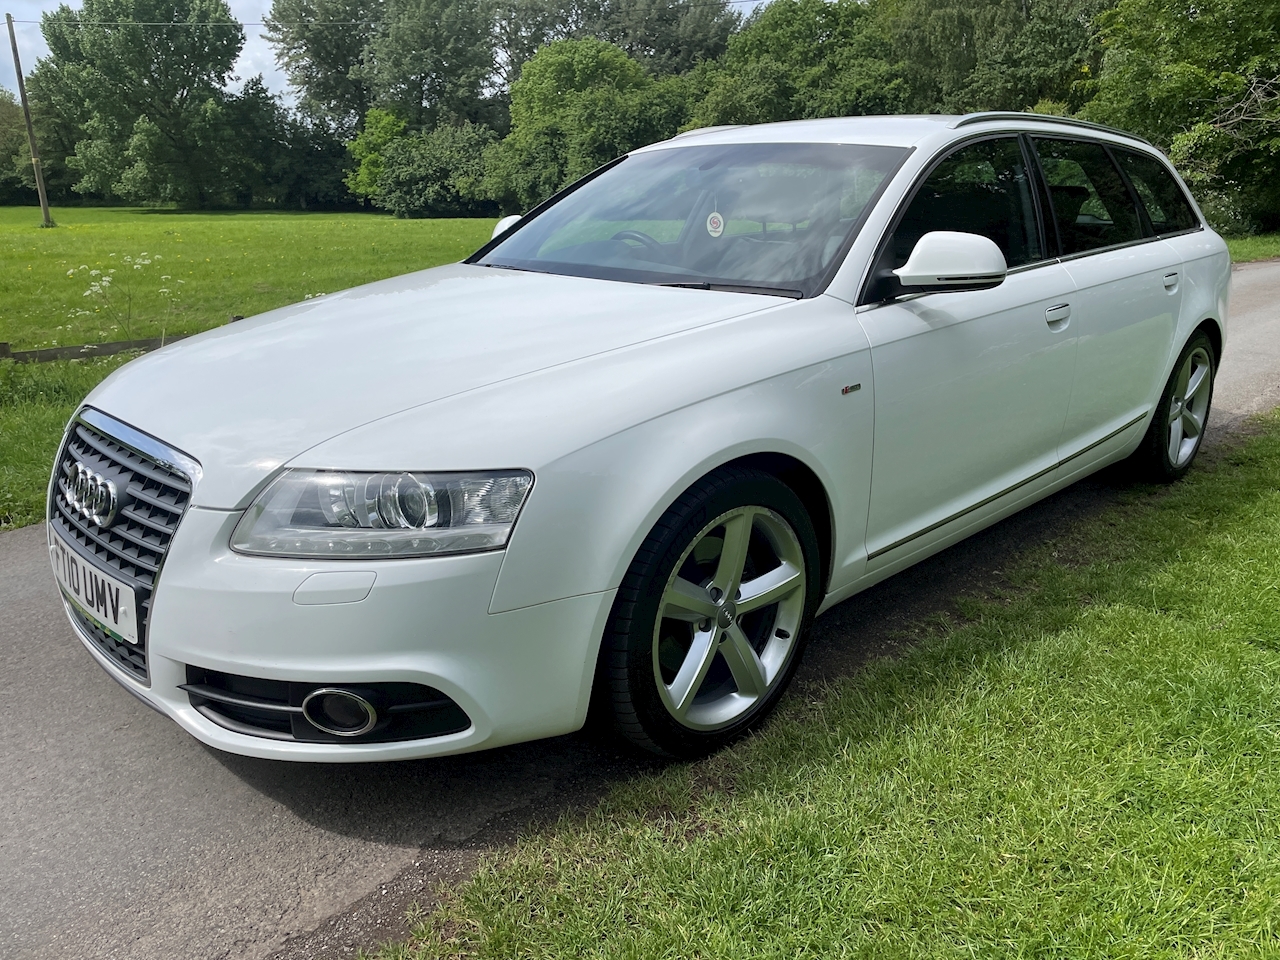 Audi A6 Avant used cars for sale in Bristol